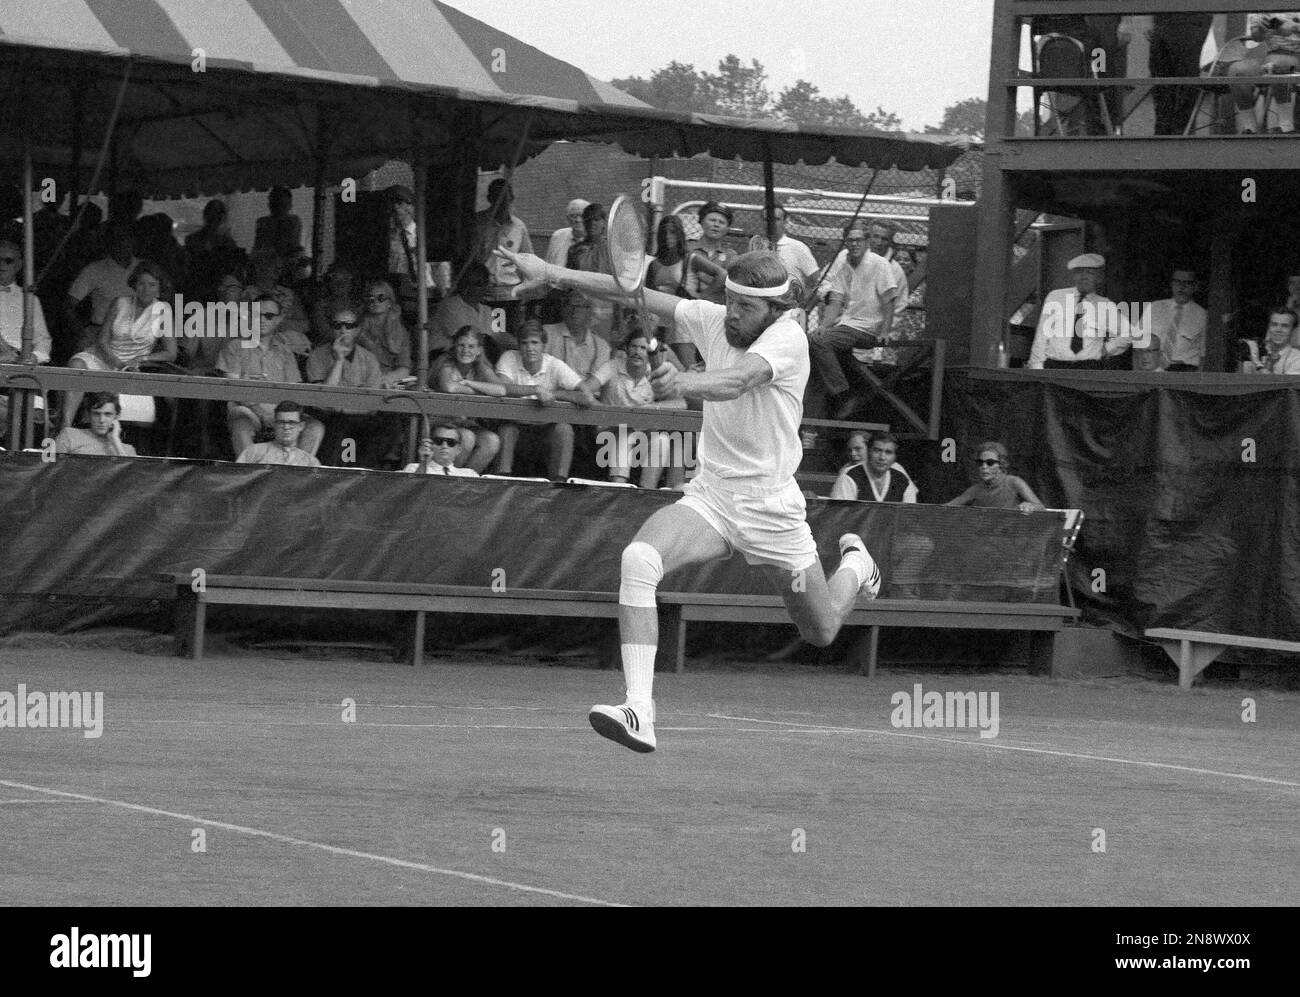 Torben Ulrich of Denmark in action in their match on August 31, 1969 in the  U.S. Open tennis championships. The aging Pancho Gonzales was down two sets  to one when he rallied